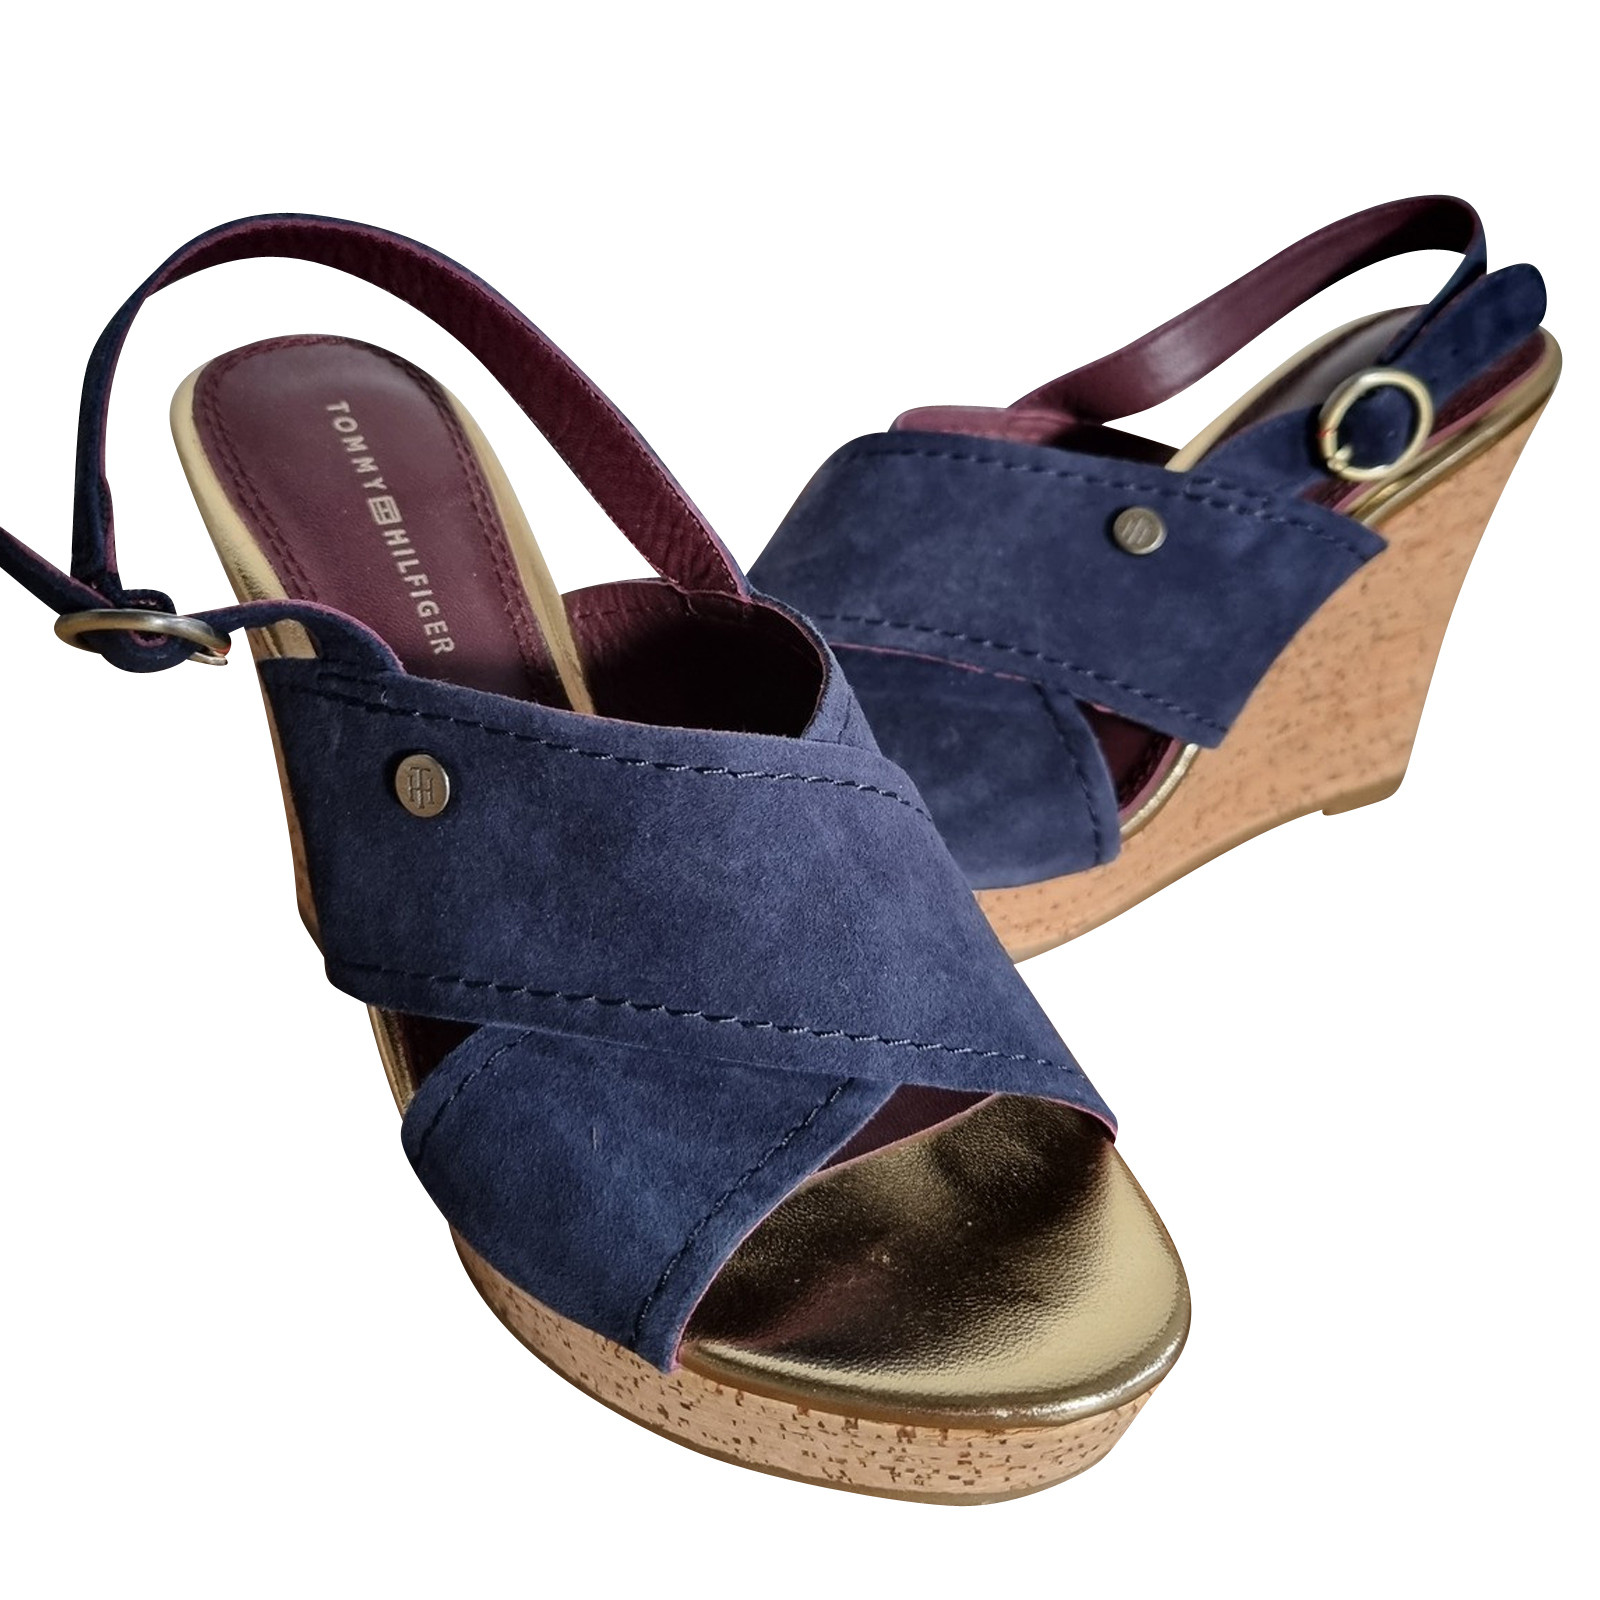 TOMMY HILFIGER Women's Sandals Leather in Blue Size: EU 36